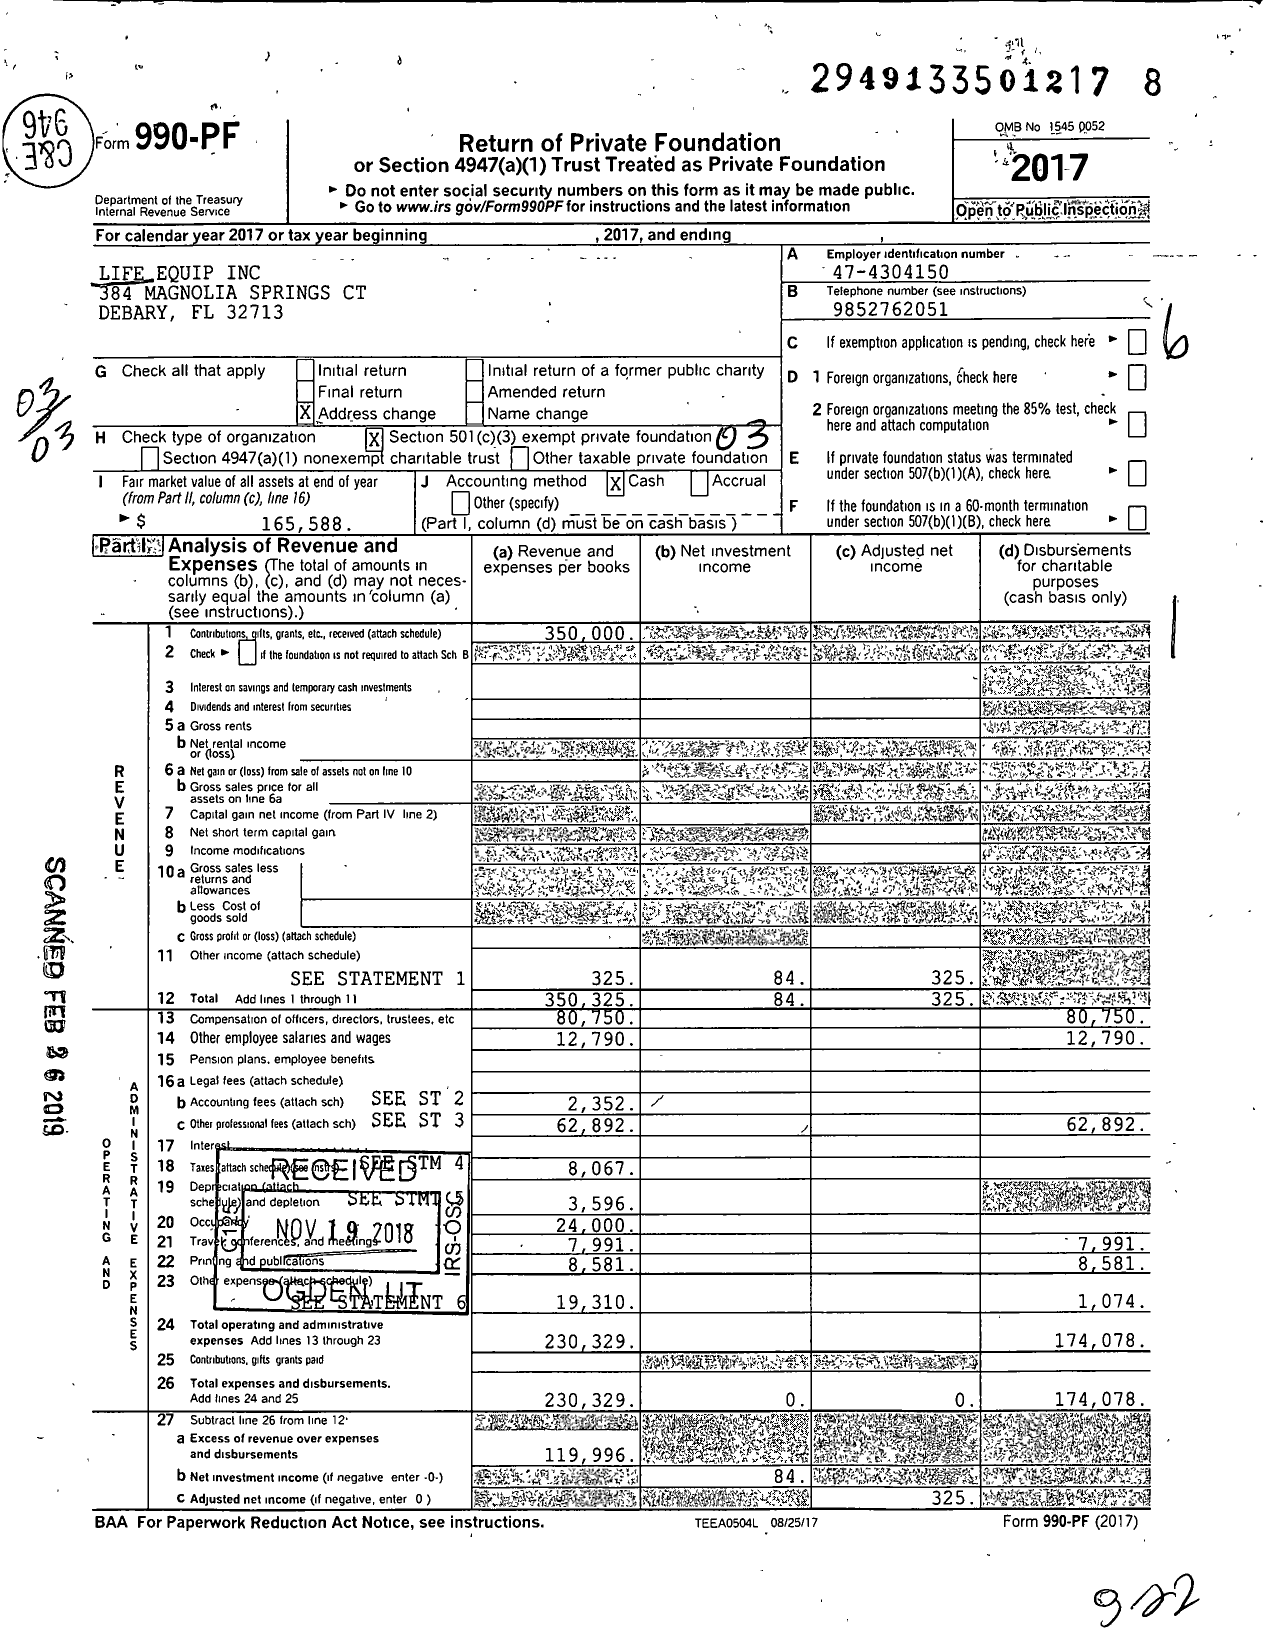 Image of first page of 2017 Form 990PF for Life Equip